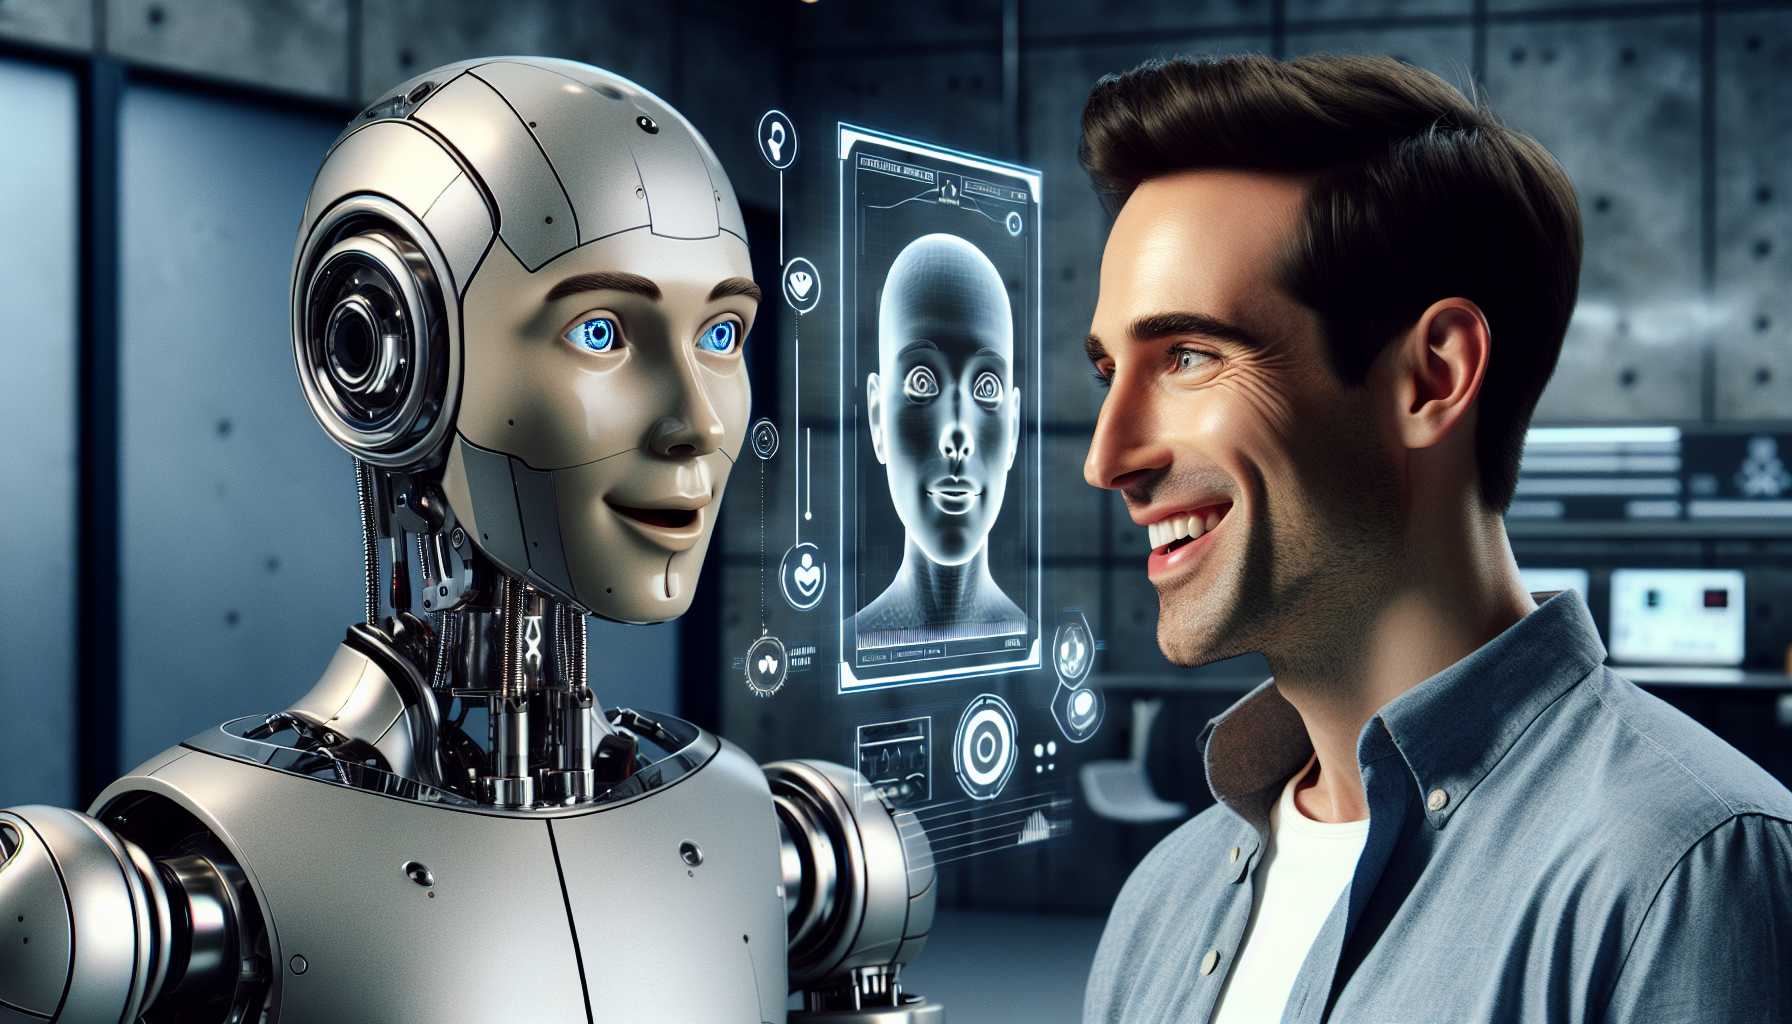 Robot with human-like facial expressions interacting with a person